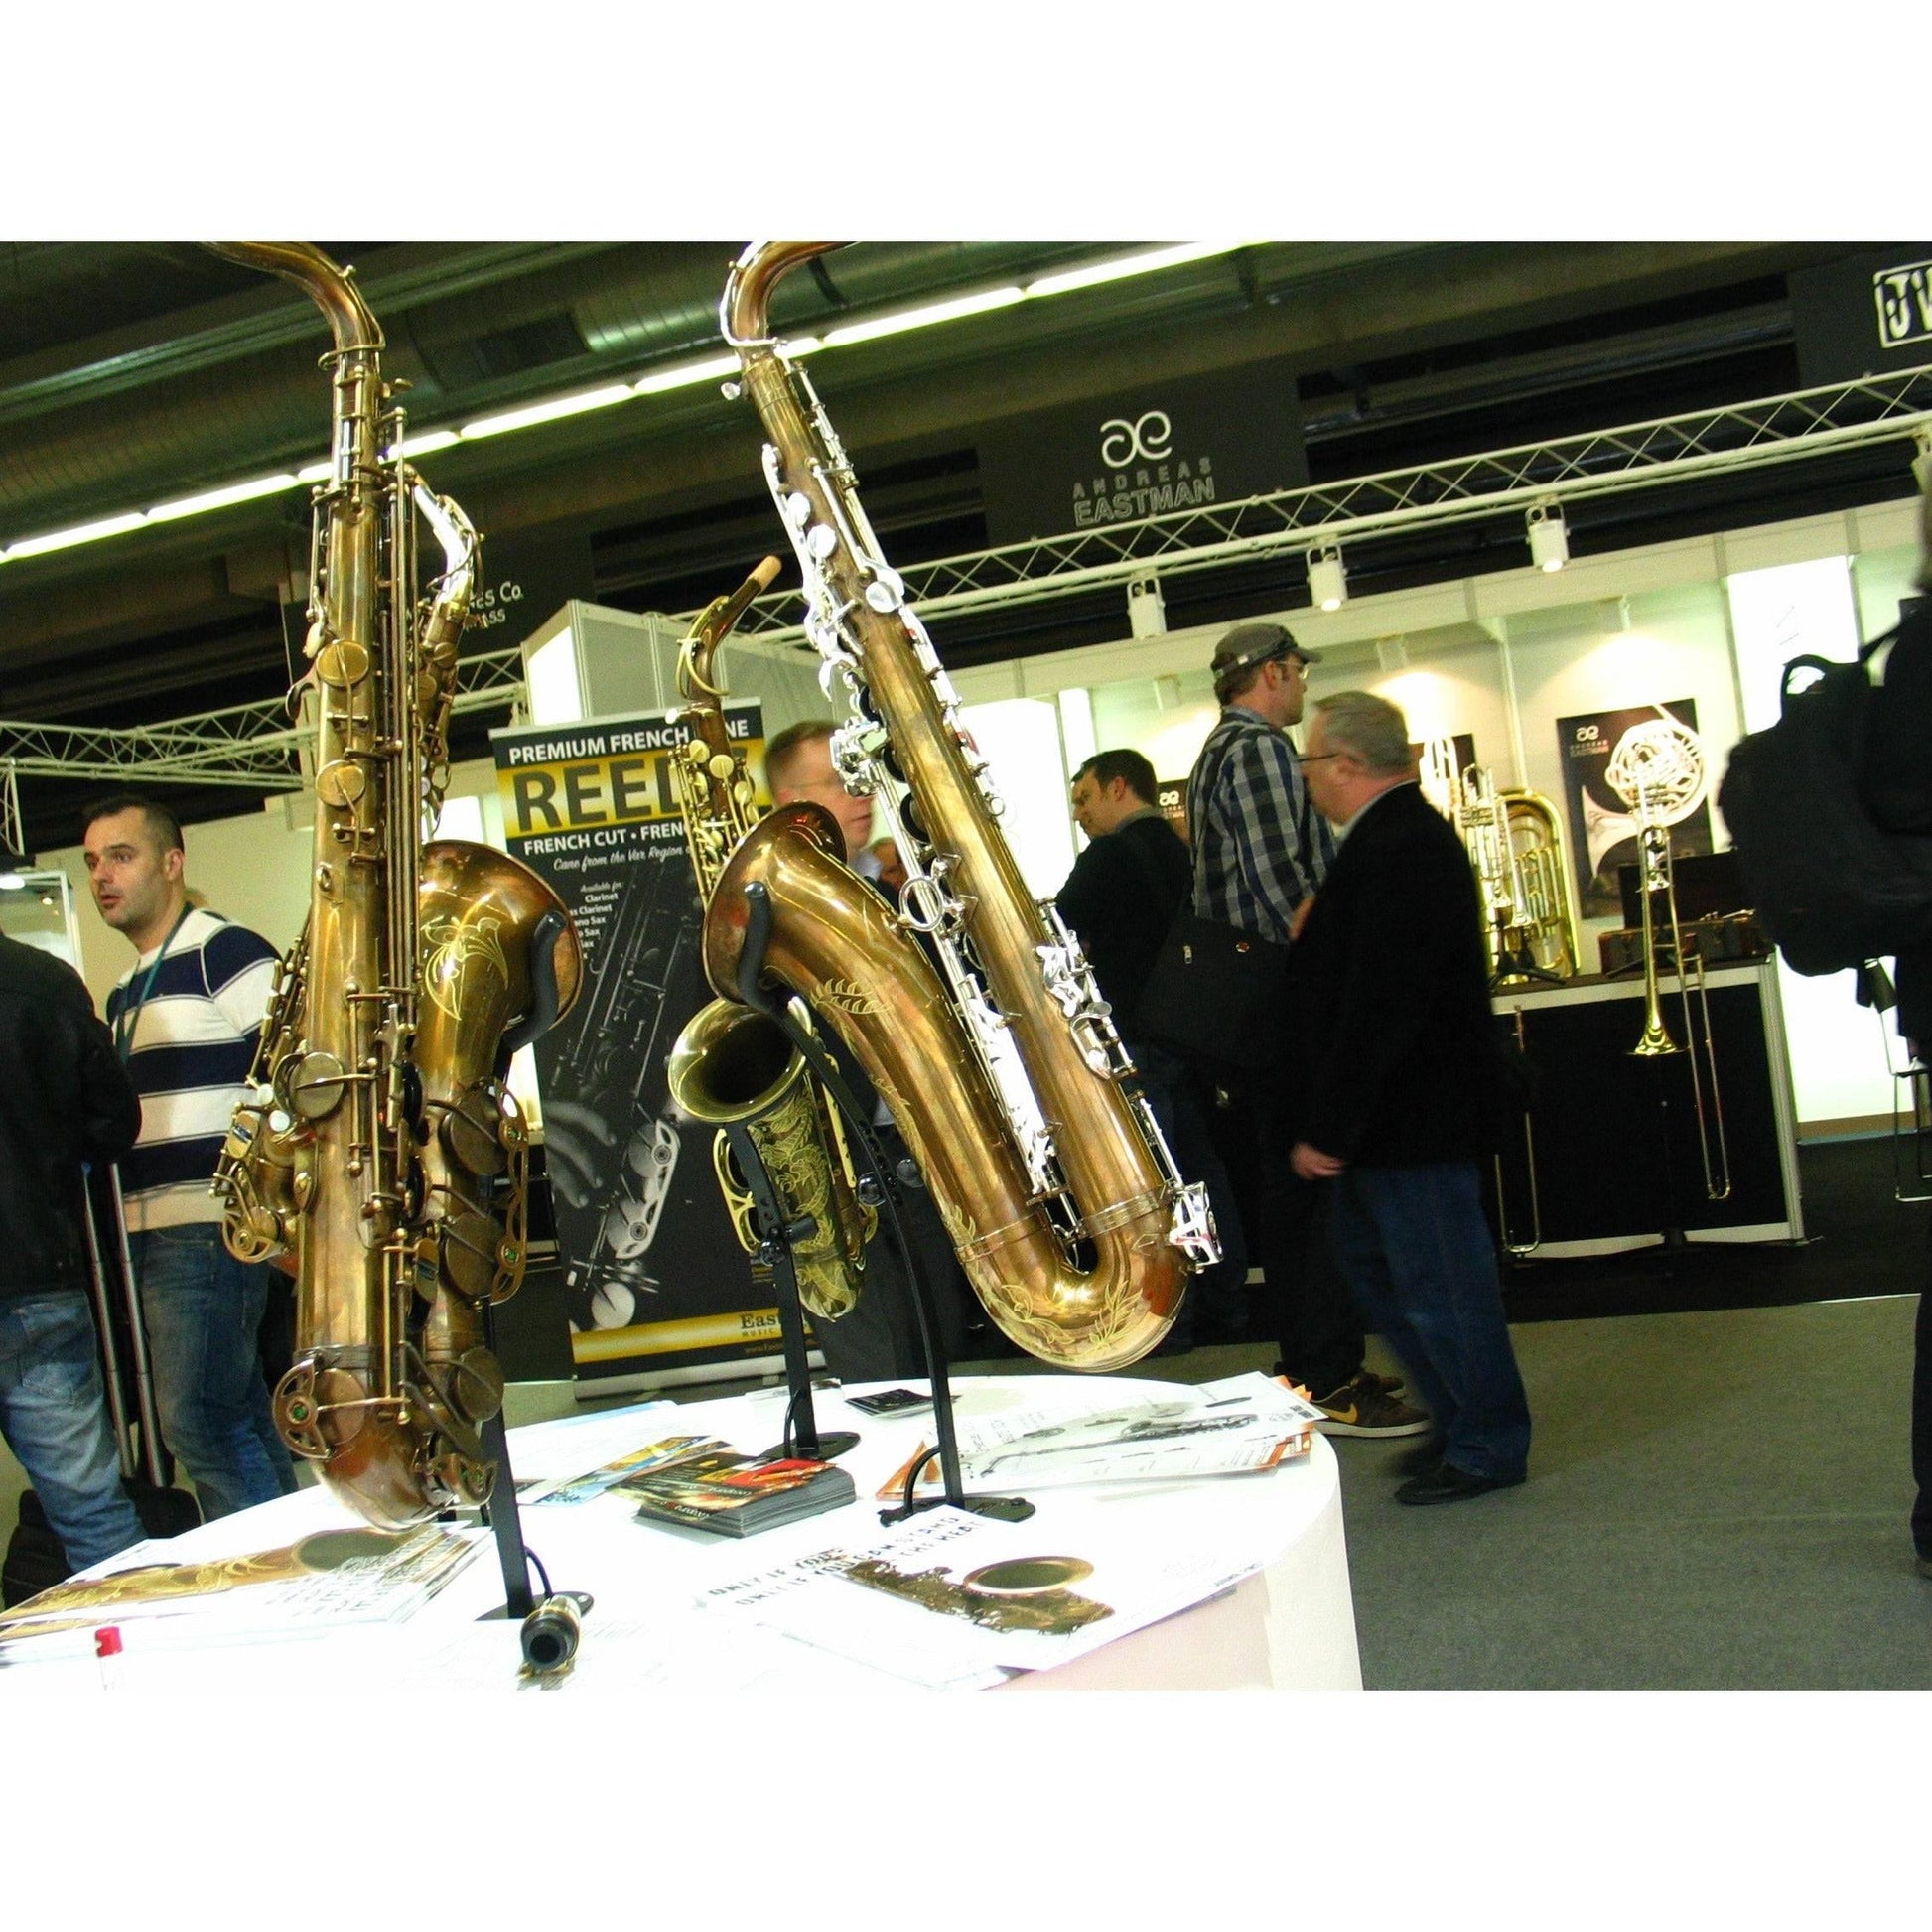 tradeshow visitors with 4 exhibit desktop tenor saxophone stands with instruments on display in the foreground by Locoparasaxo